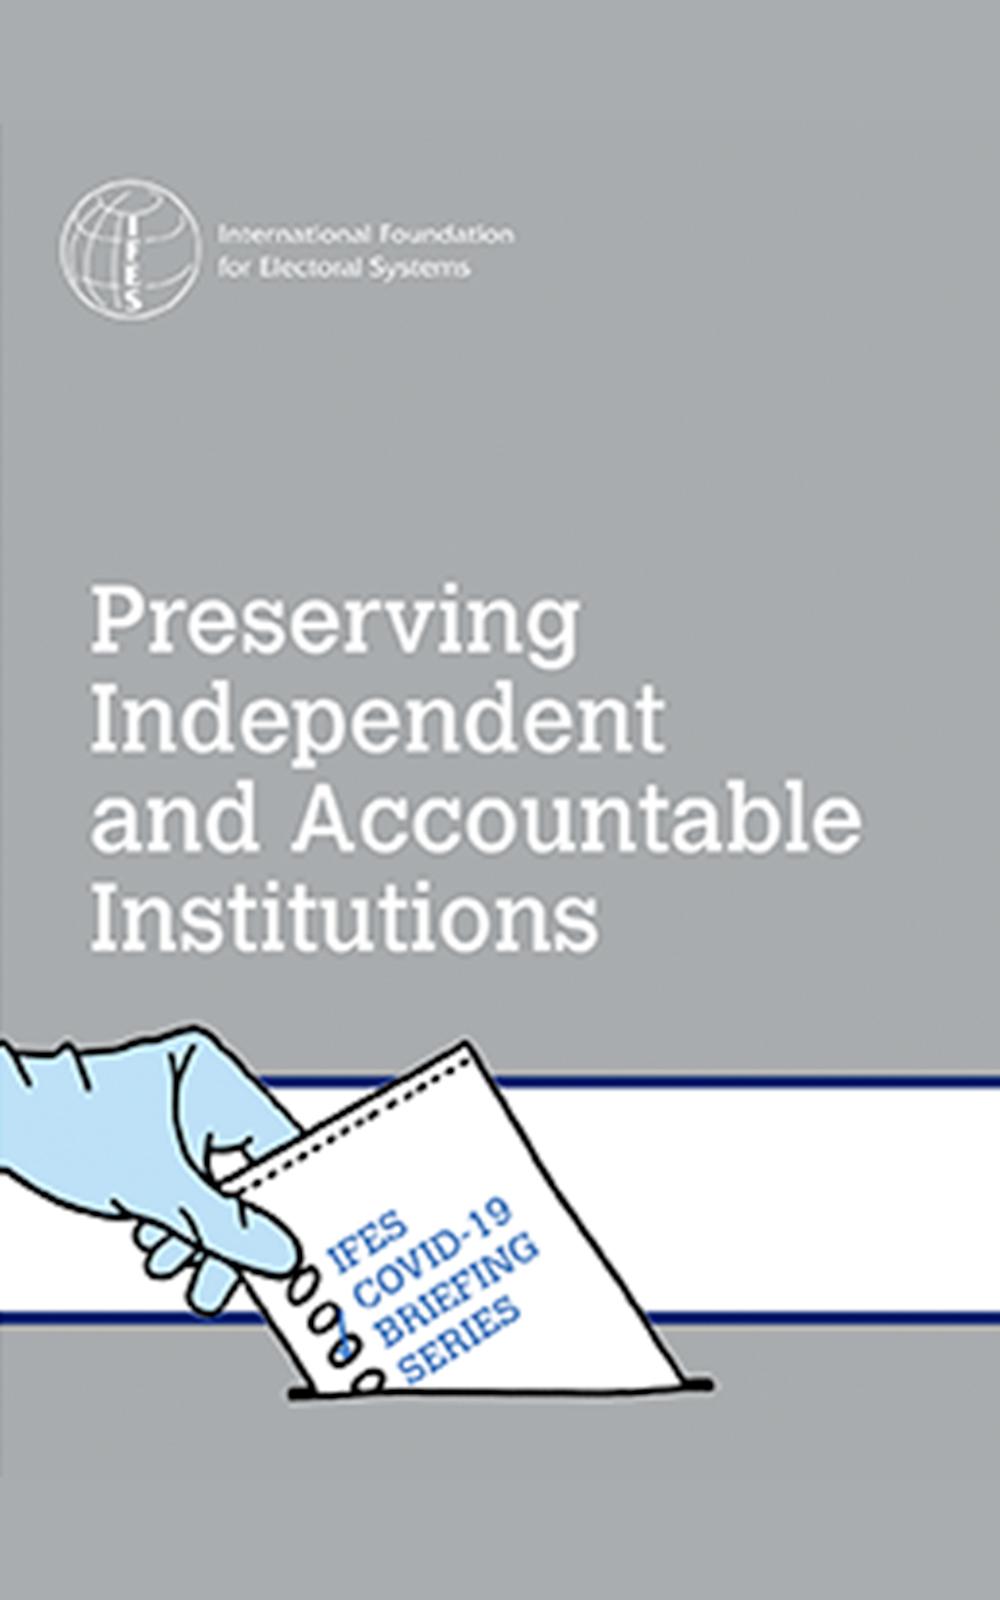 COVID-19 Preserving Independent and Accountable Institutions